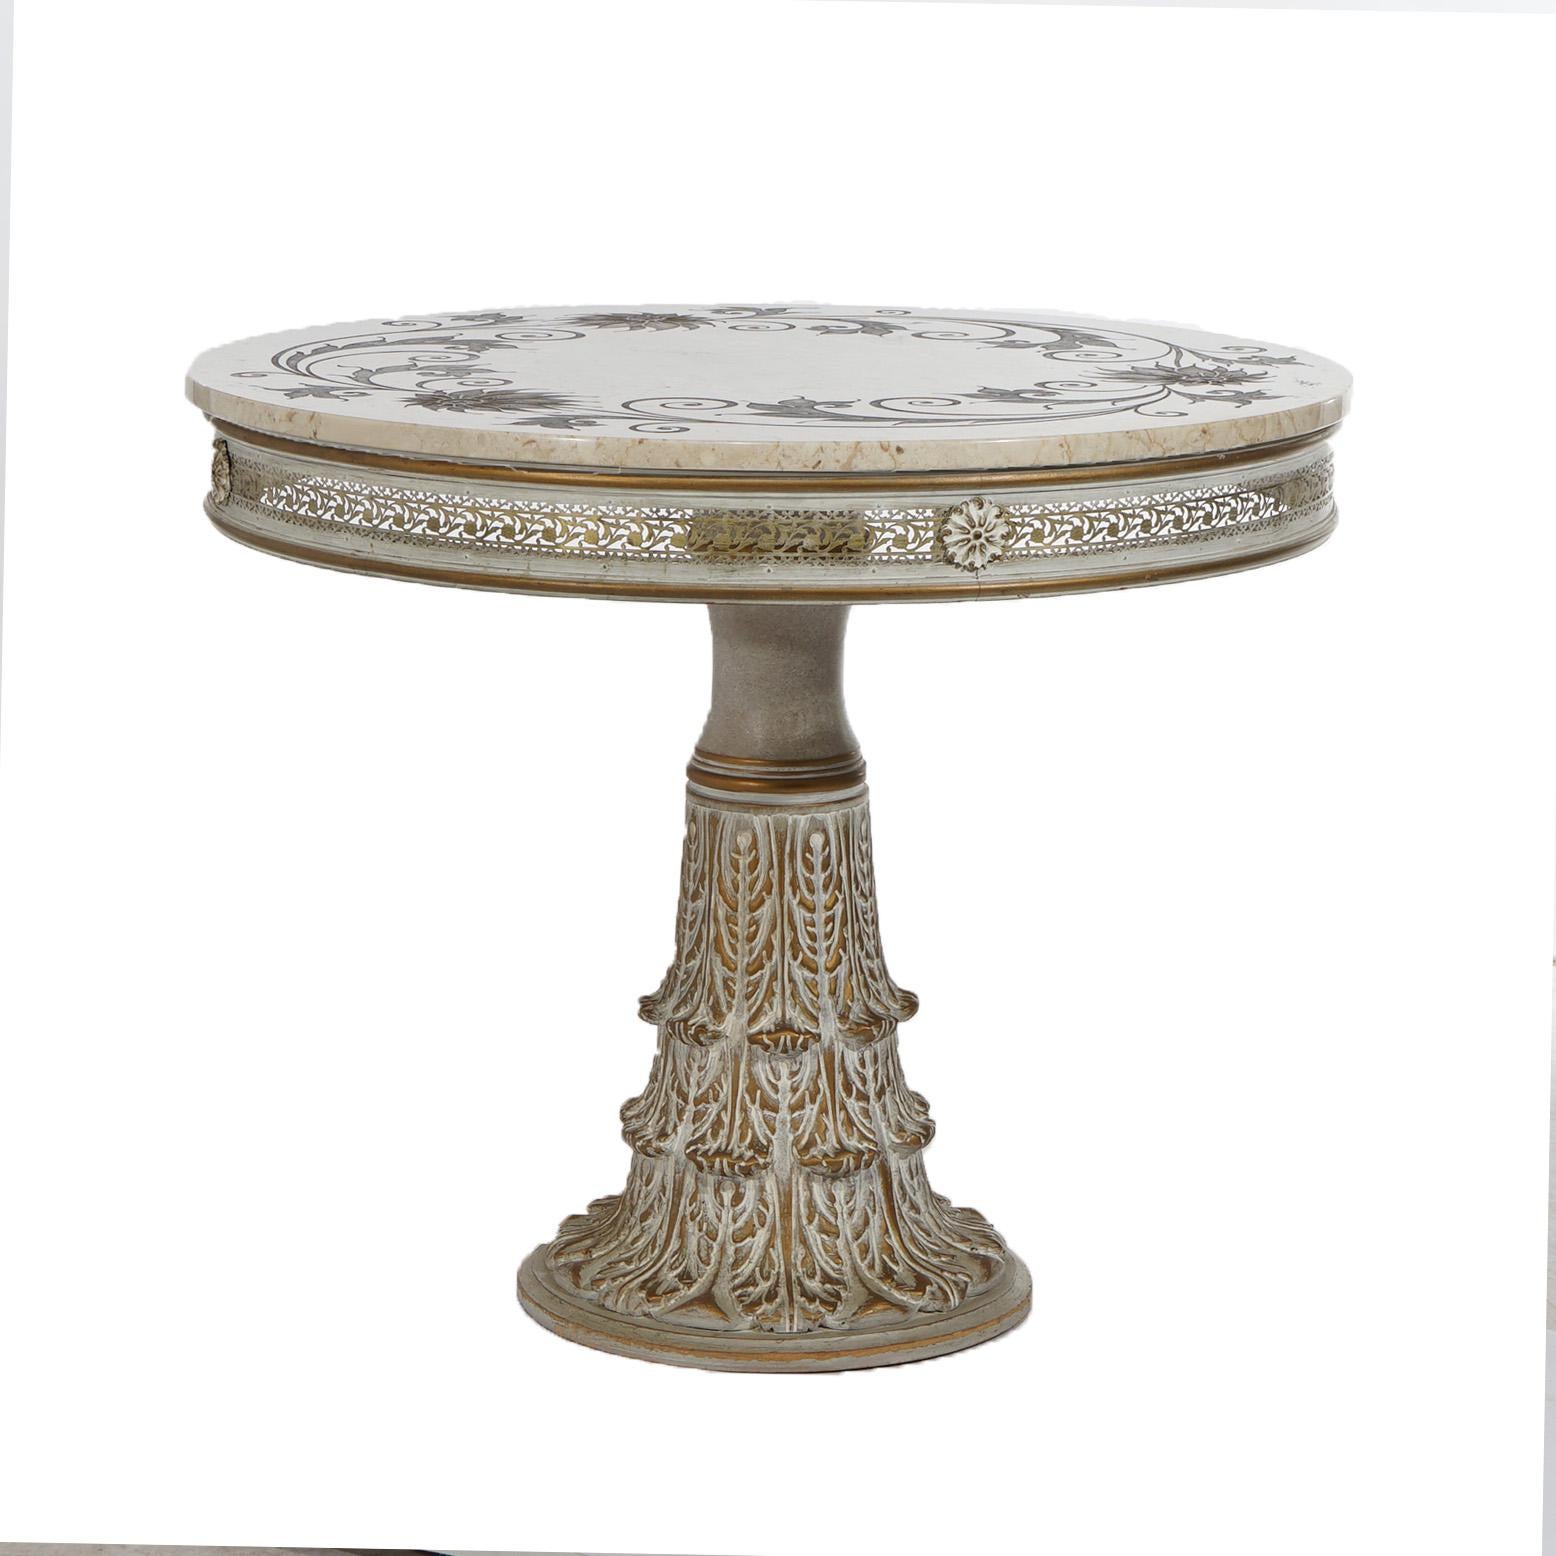 Italian Carved Wood & Marble Top Center Table With Inlaid Floral Design & Banded Bronzed Metal Floral Edge 20th C

Measures - 30.5